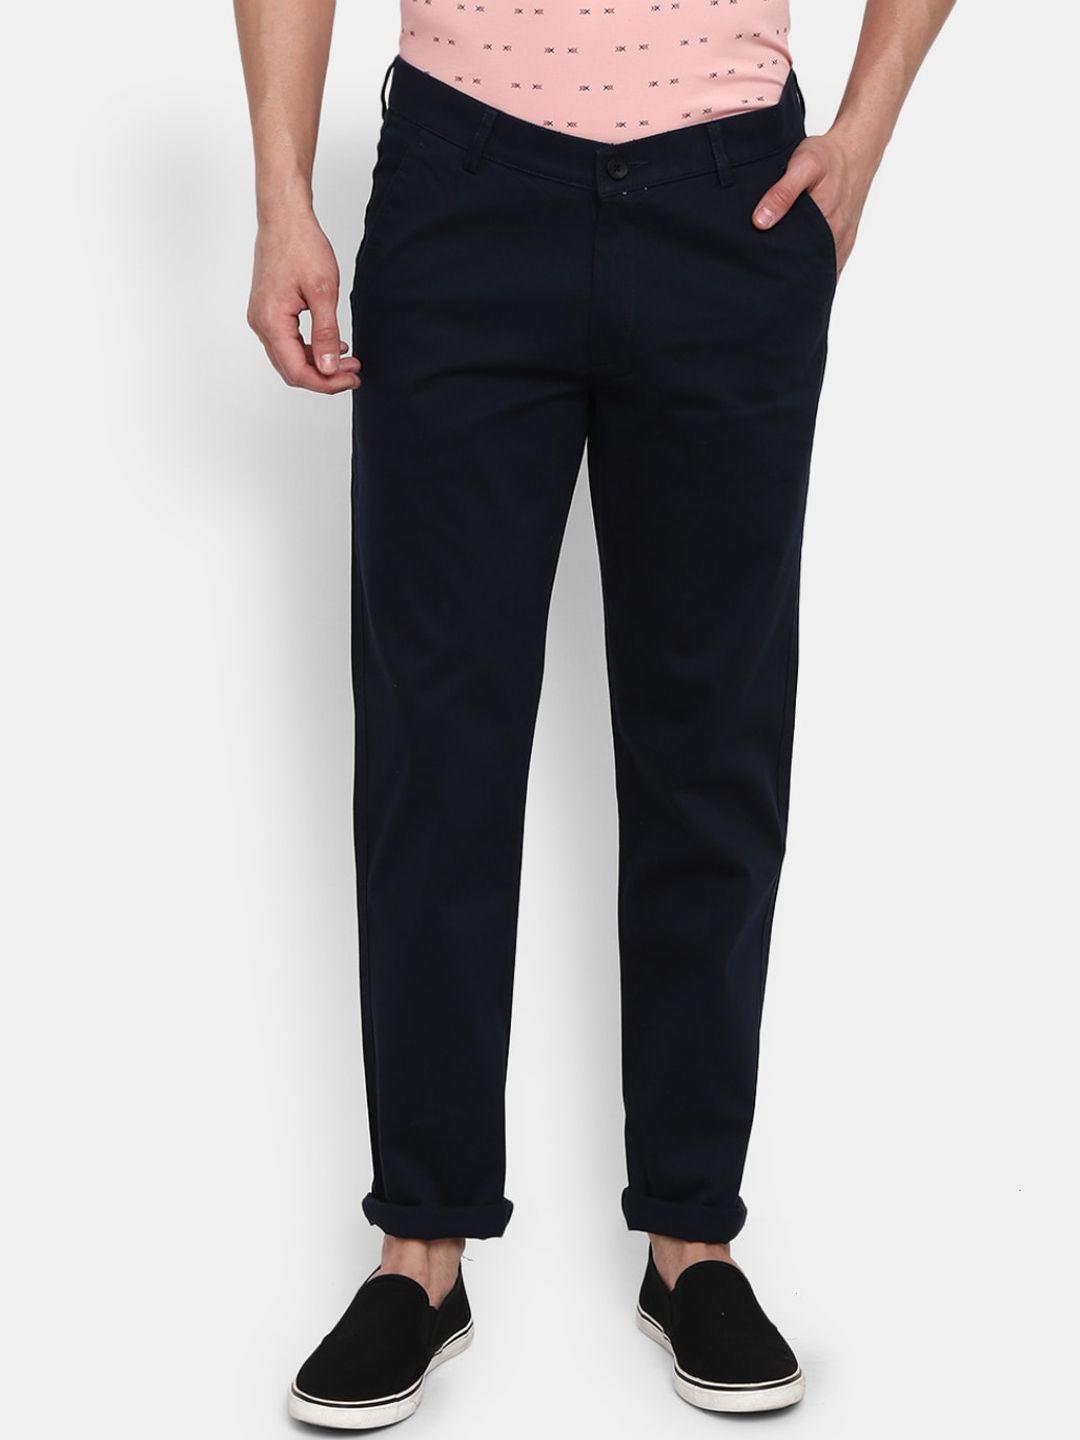 v-mart-men-navy-blue-slim-fit-easy-wash-chinos-trousers